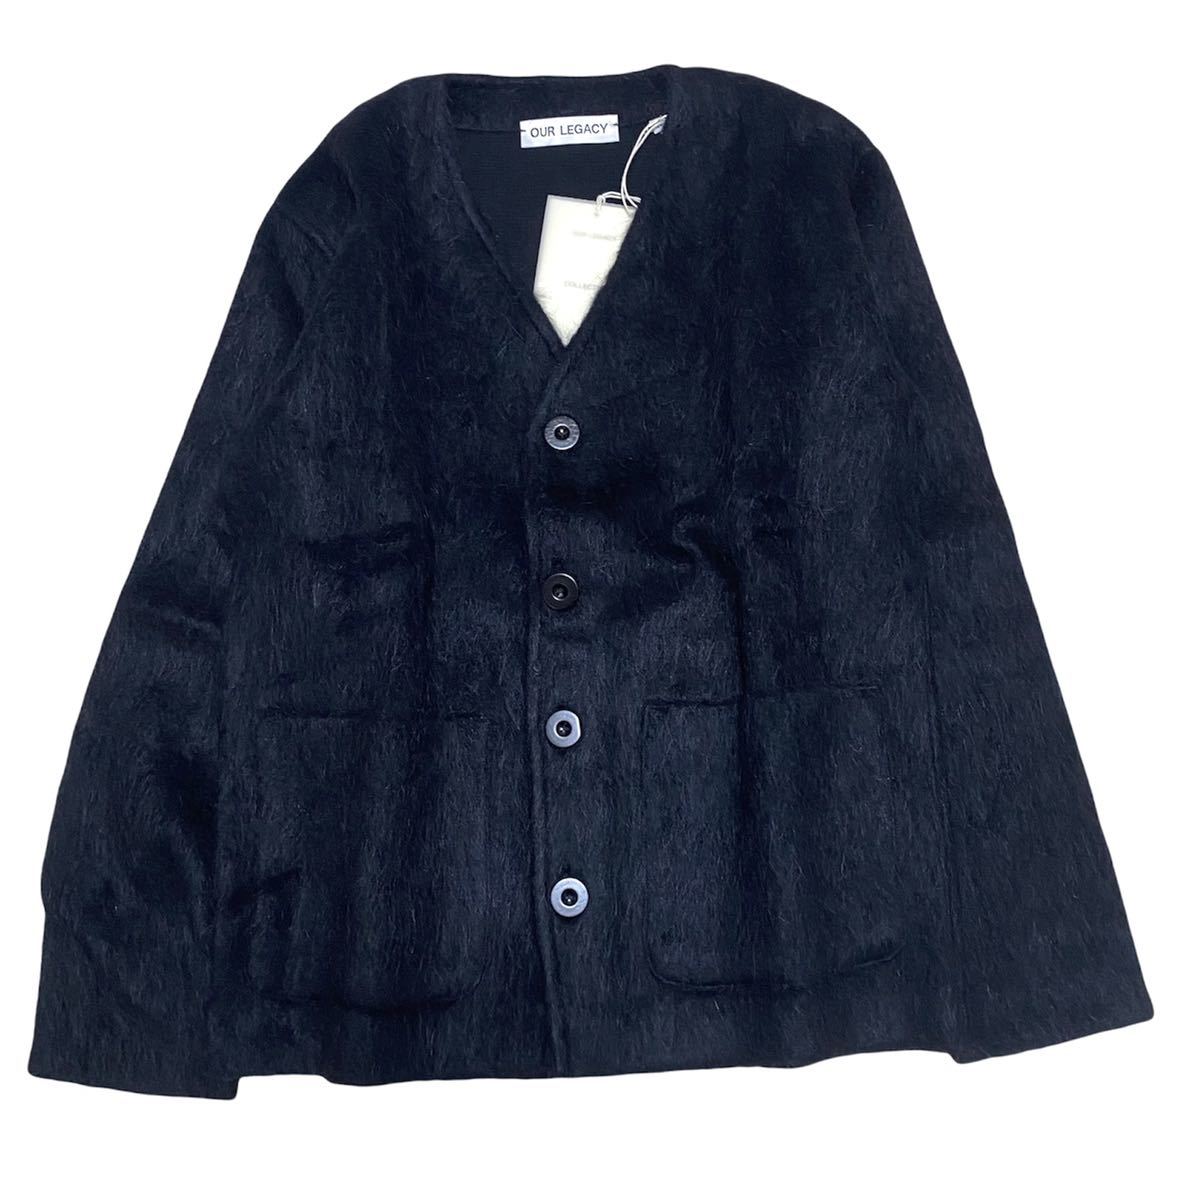 [ new goods ] prompt decision * our legacy Hour Legacy * 21 FWmo hair cardigan alpaca alpaca size rare 44 black outer 